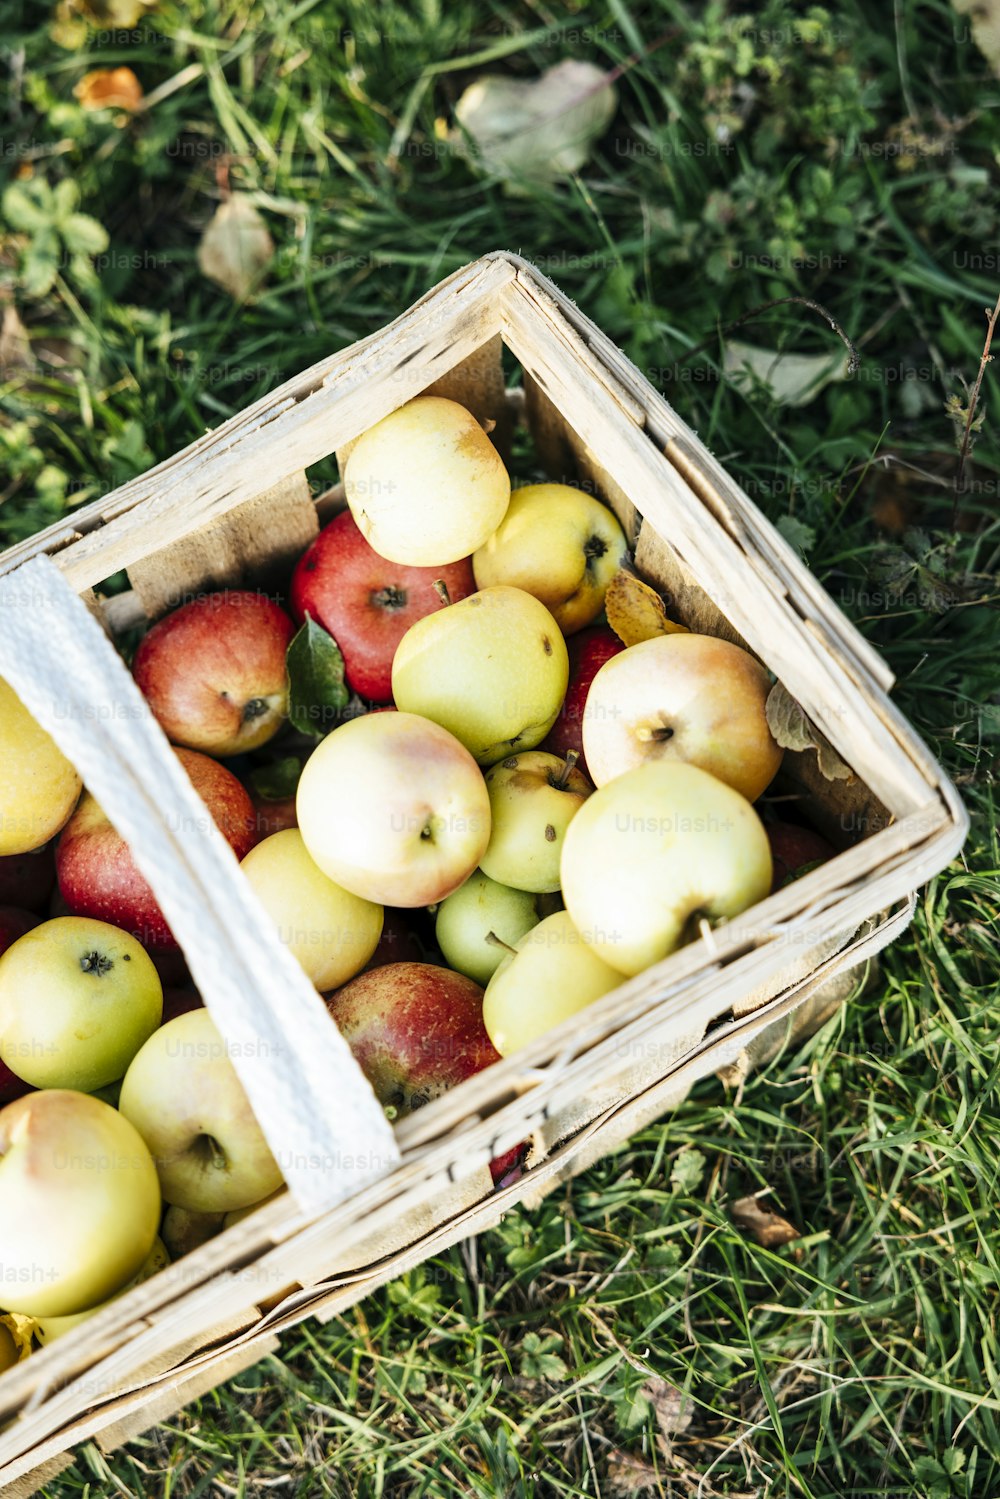 a basket of apples sitting on the grass